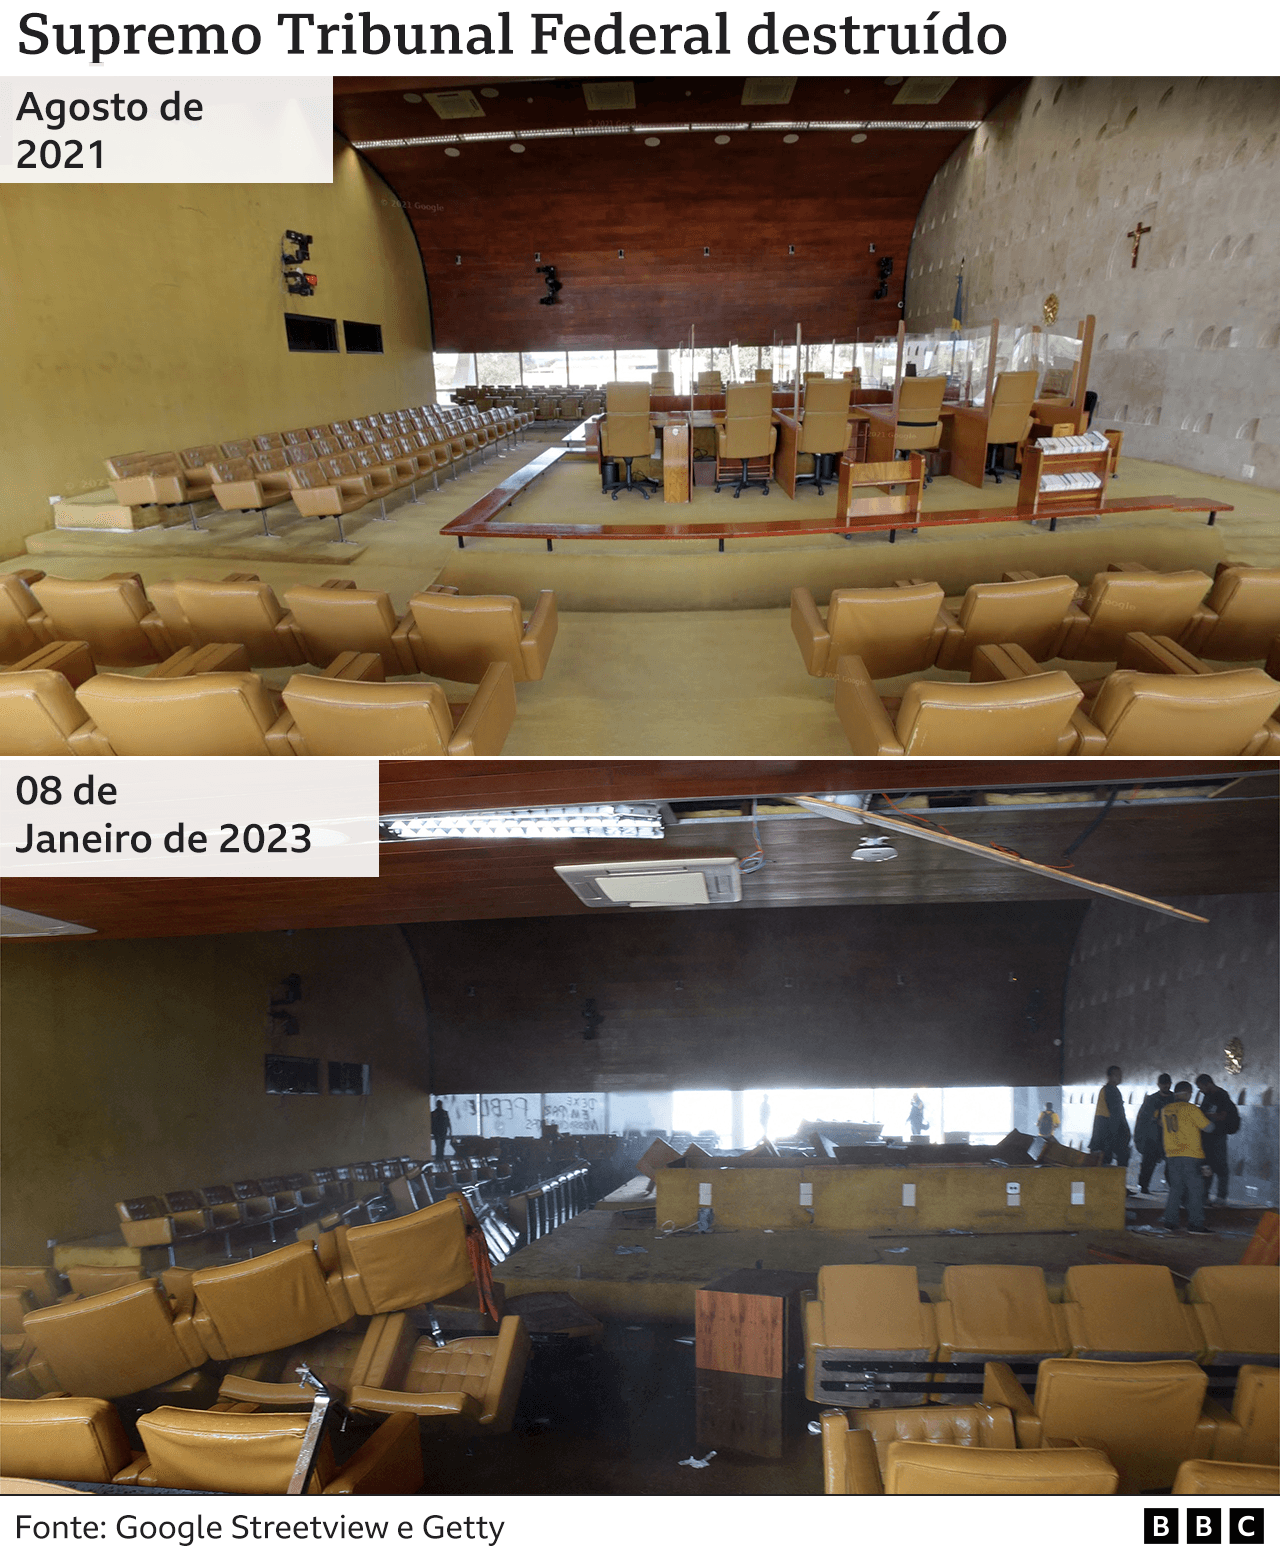 STF plenary session in August 2021, with a hall of beige chairs, the same chairs destroyed on January 8, 2023